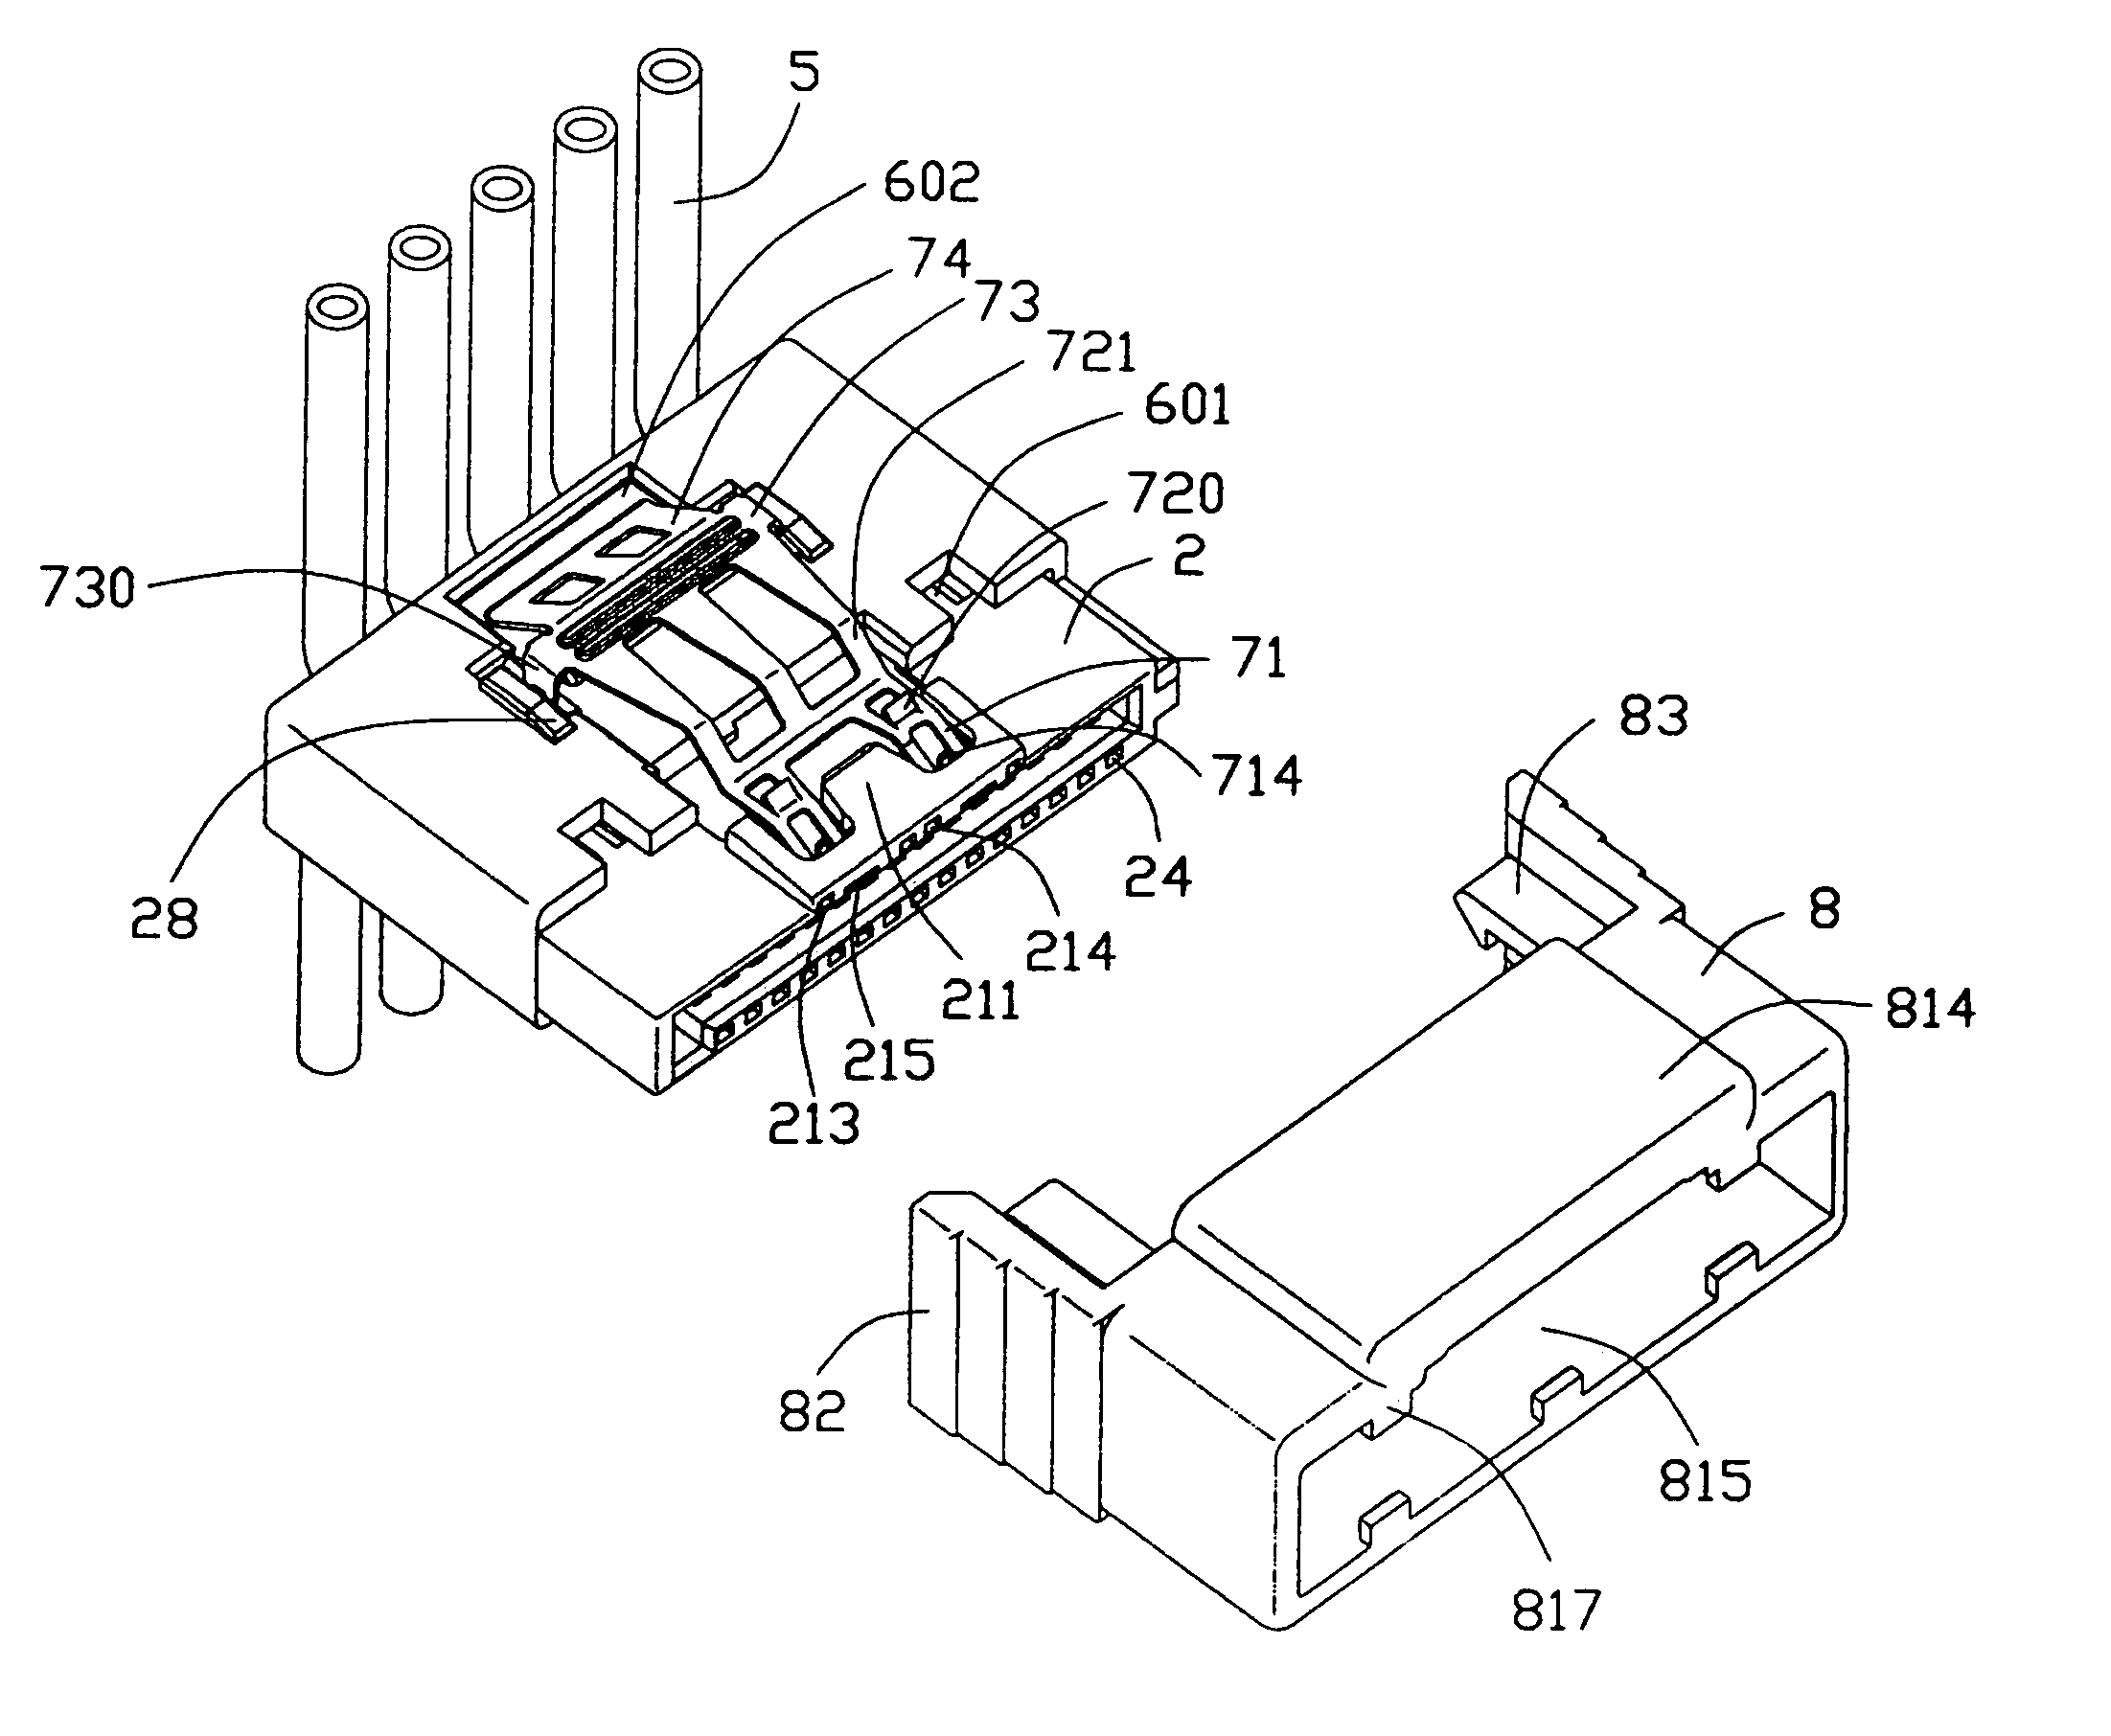 Cable end connector assembly having pulling device